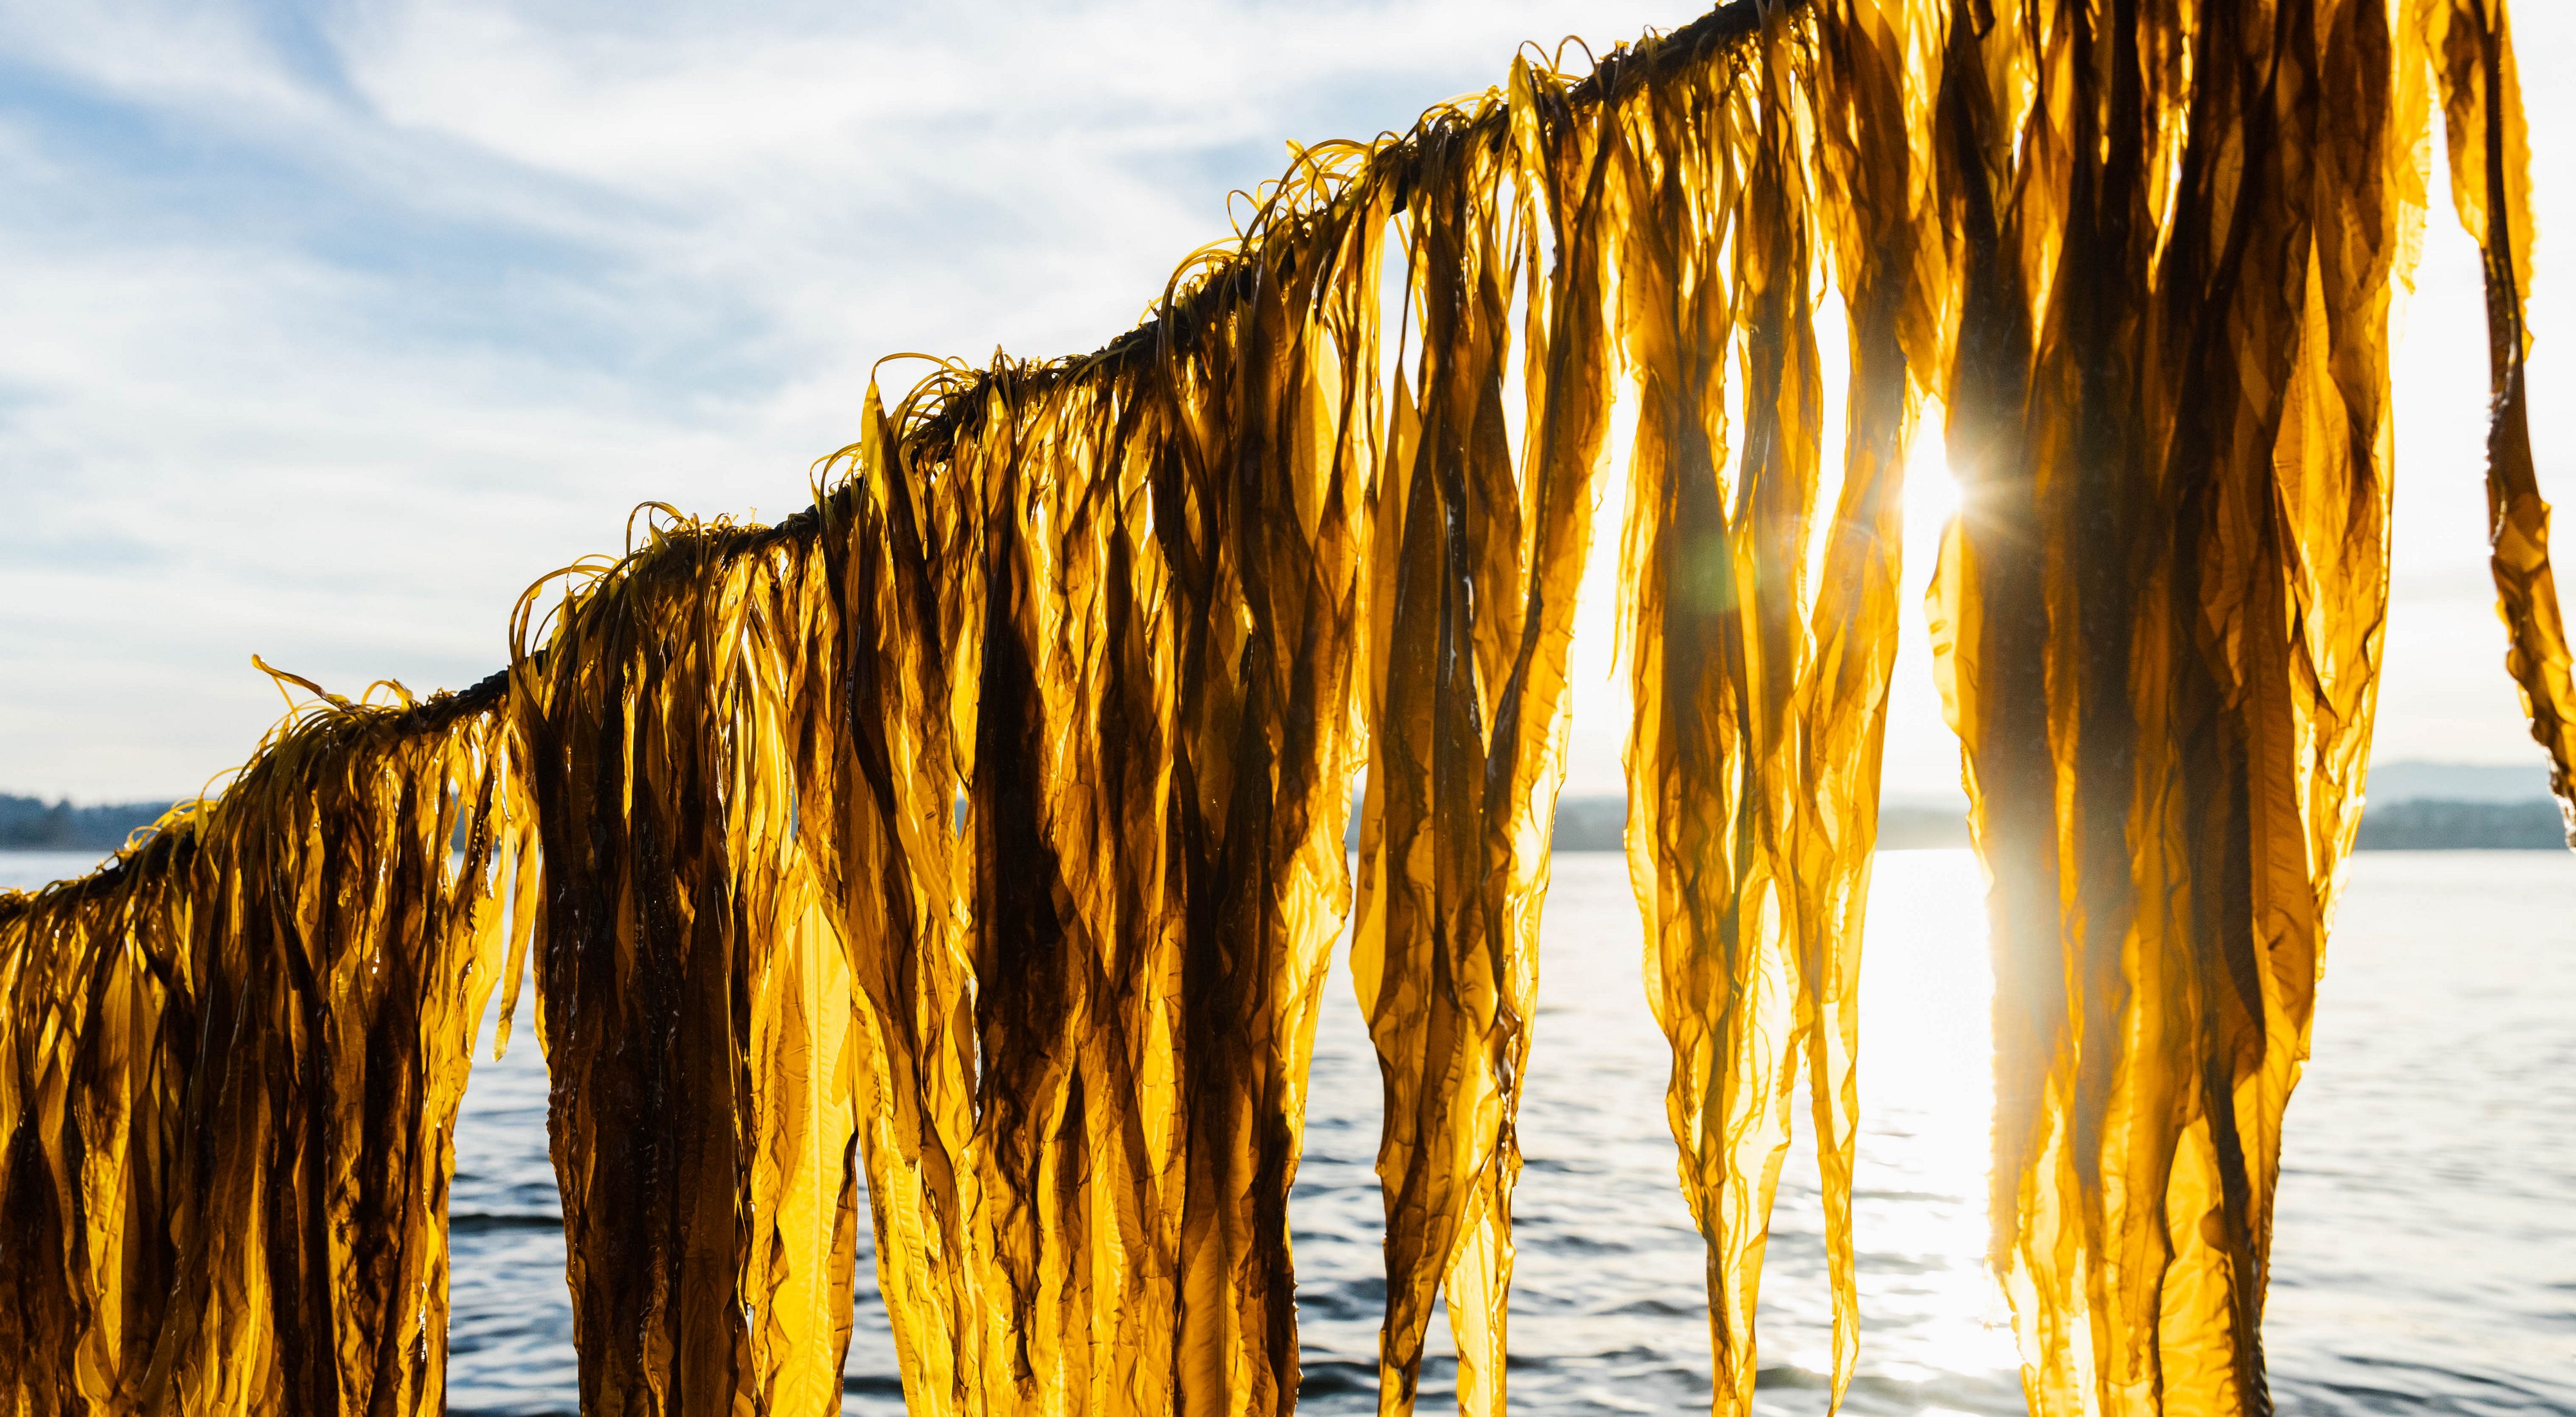 Seaweed hangs on a line, drying in the sun.